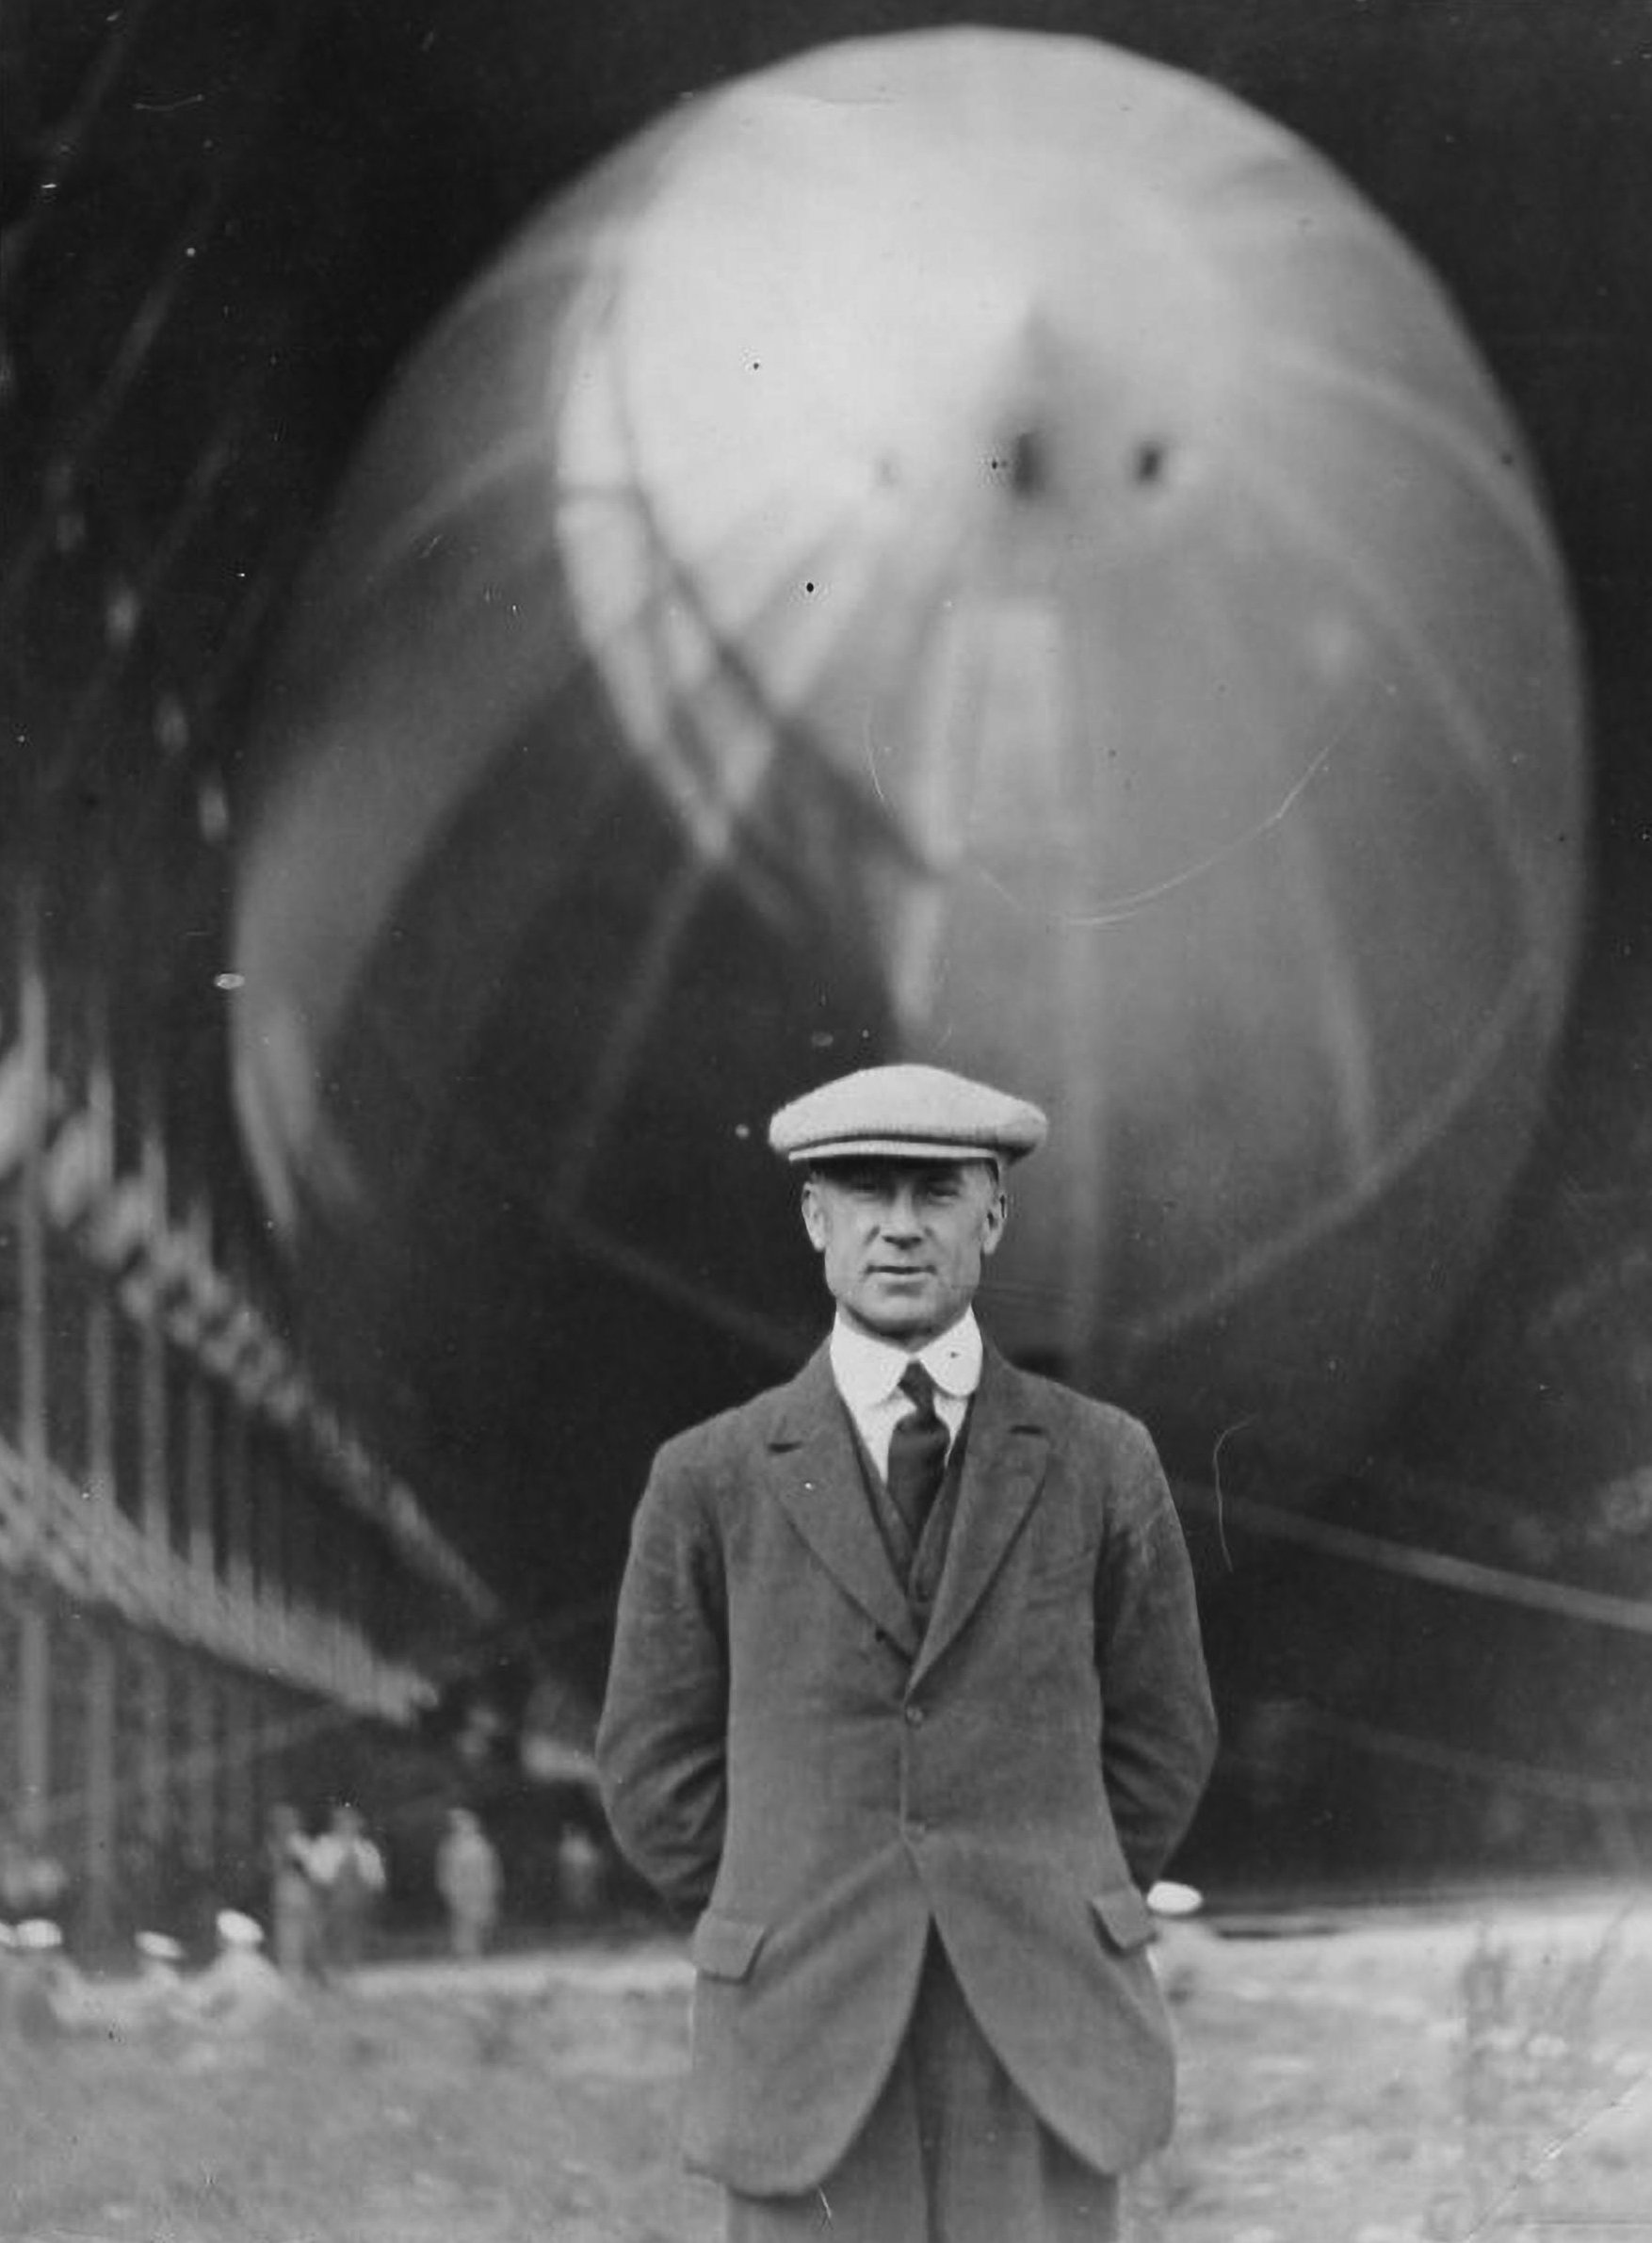 Charles Campbell. An airship engineer from the 1920s.